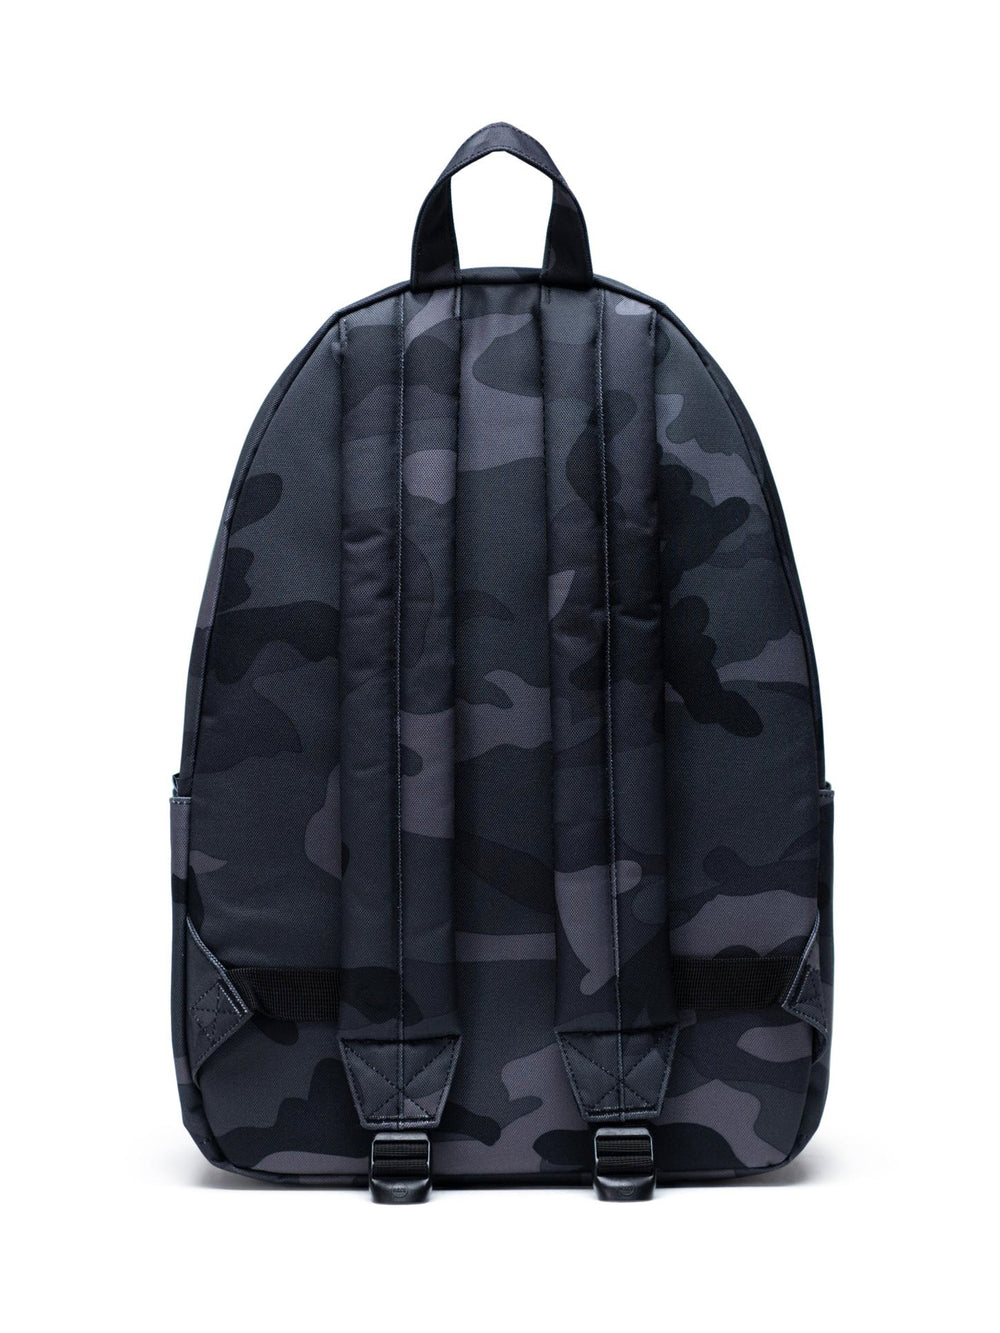 HERSCHEL SUPPLY CO. CLASSIC XL 30L BACKPACK - NIGHT CAMO - CLEARANCE